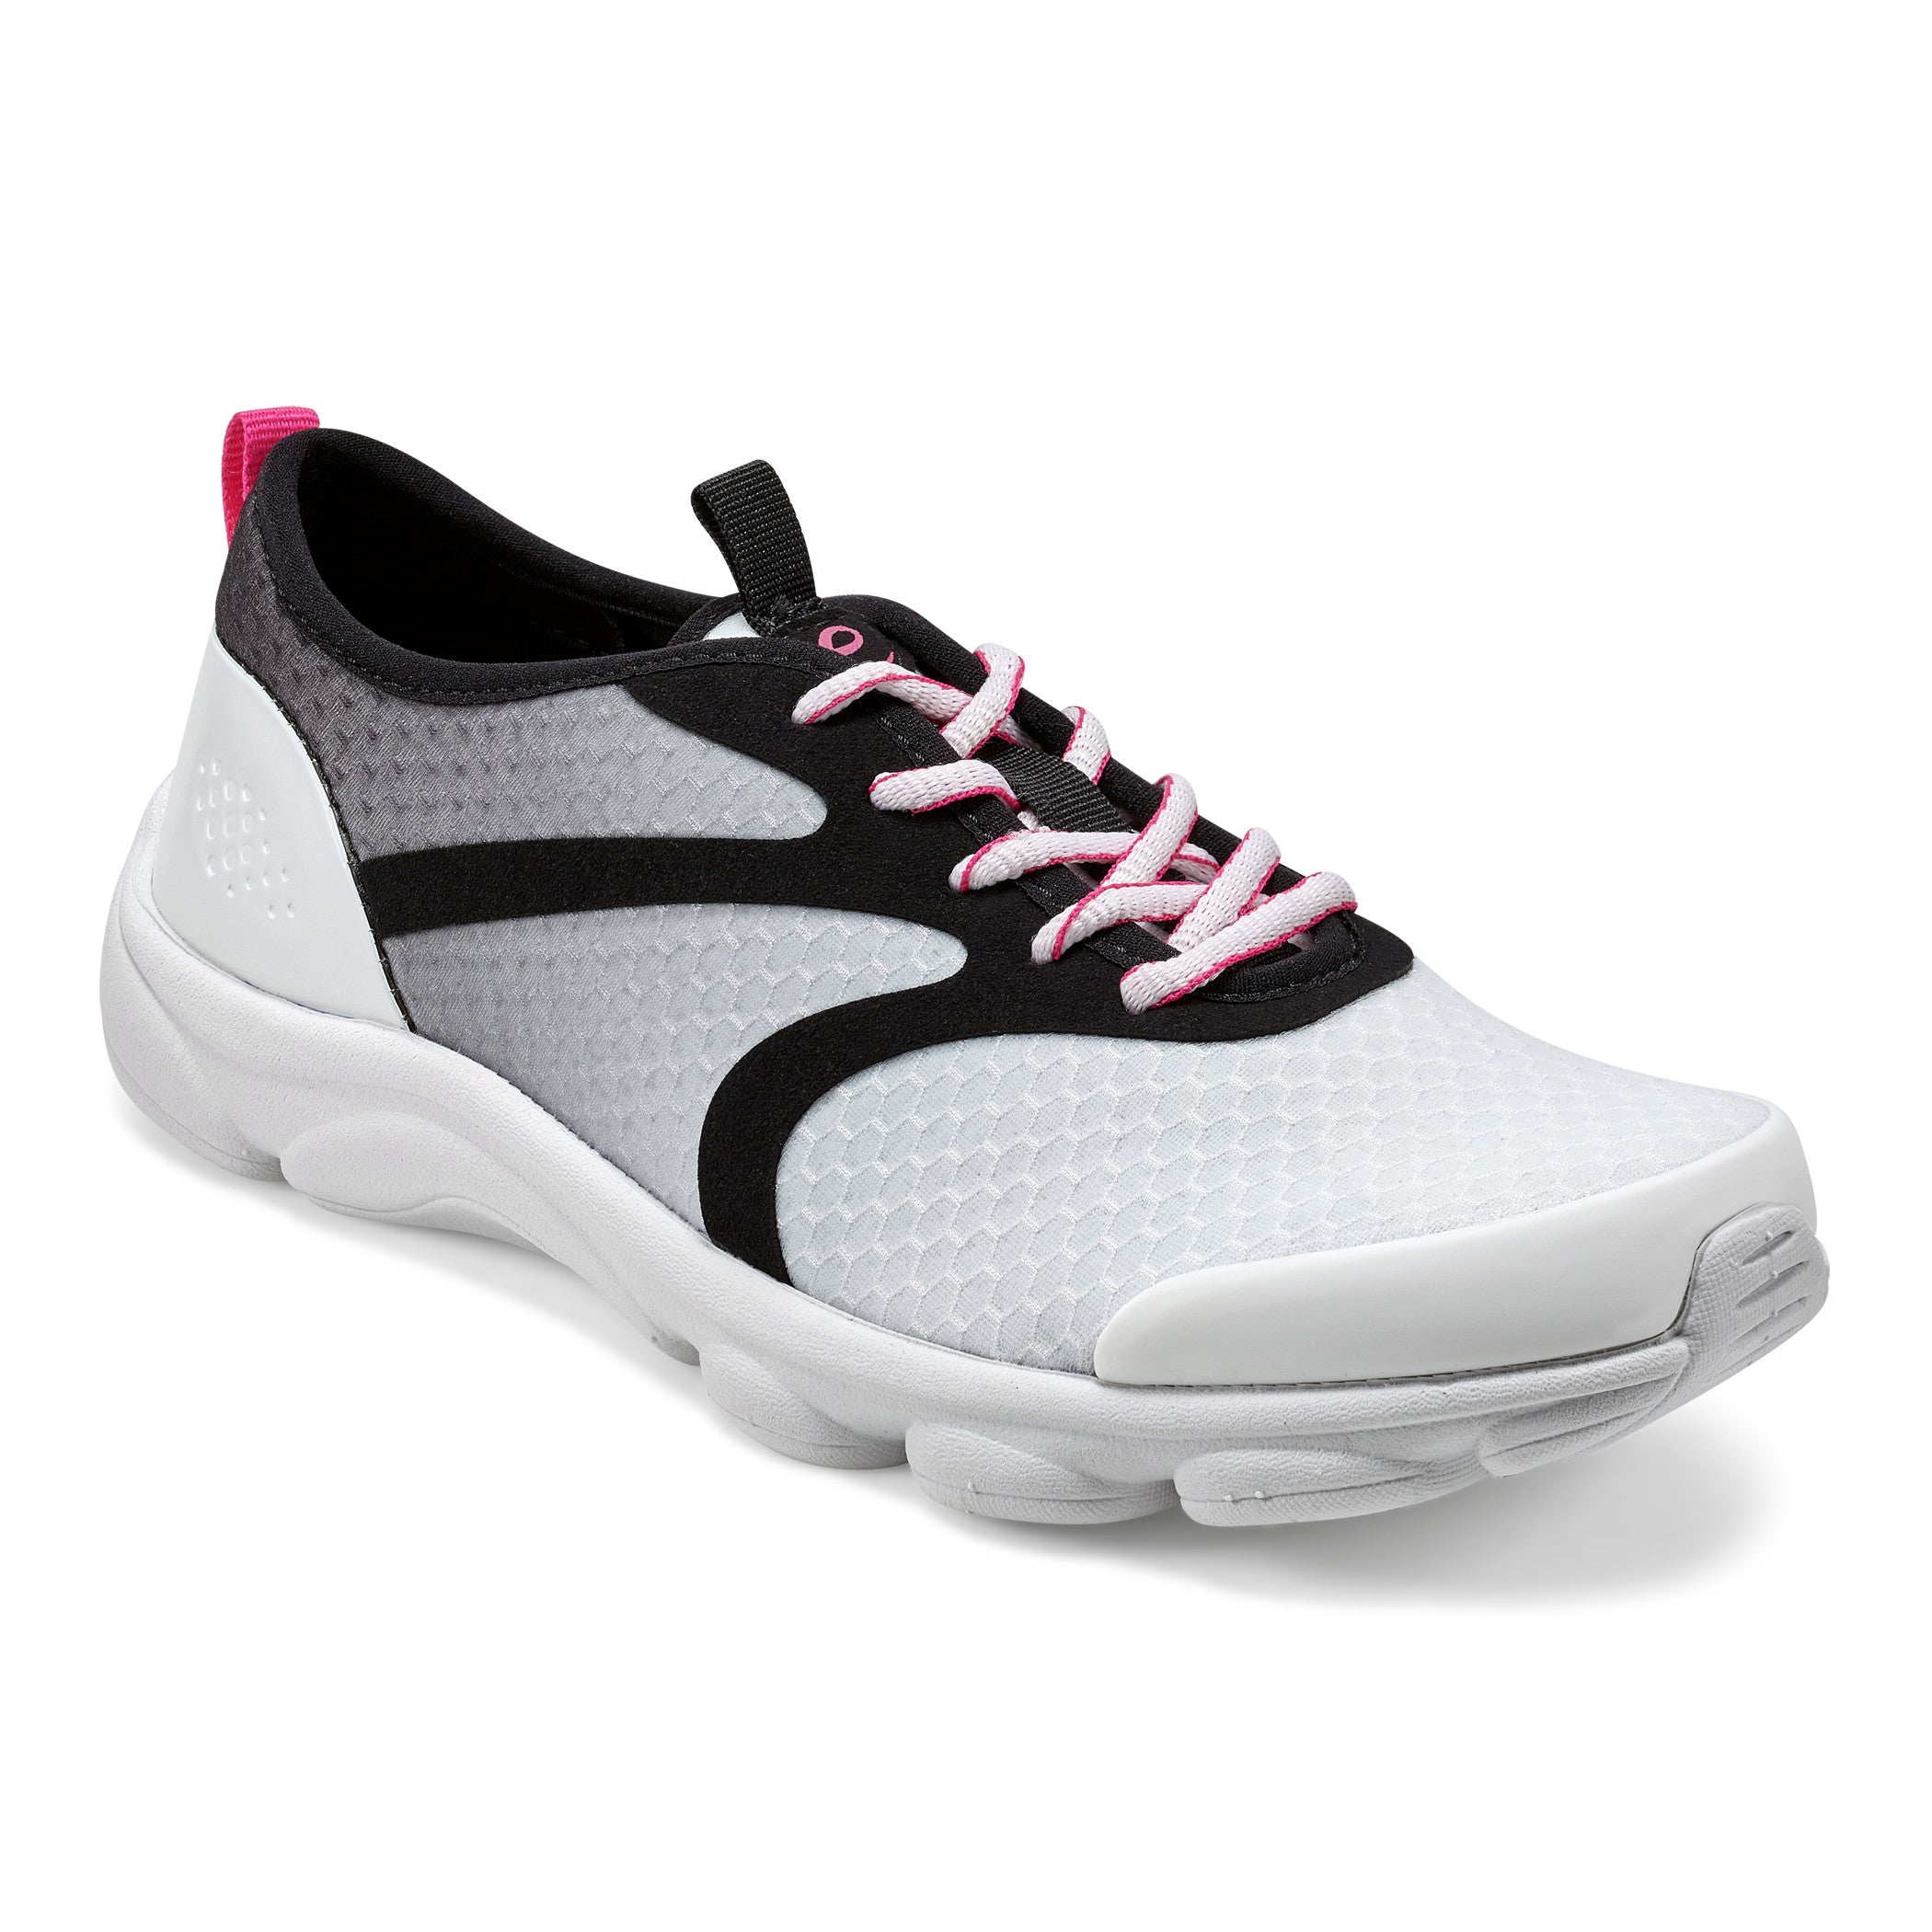 Buy Puma Womens Basket Heart Reinvent Wn's Black-White Sneaker - 8 UK  (36993502) at Amazon.in